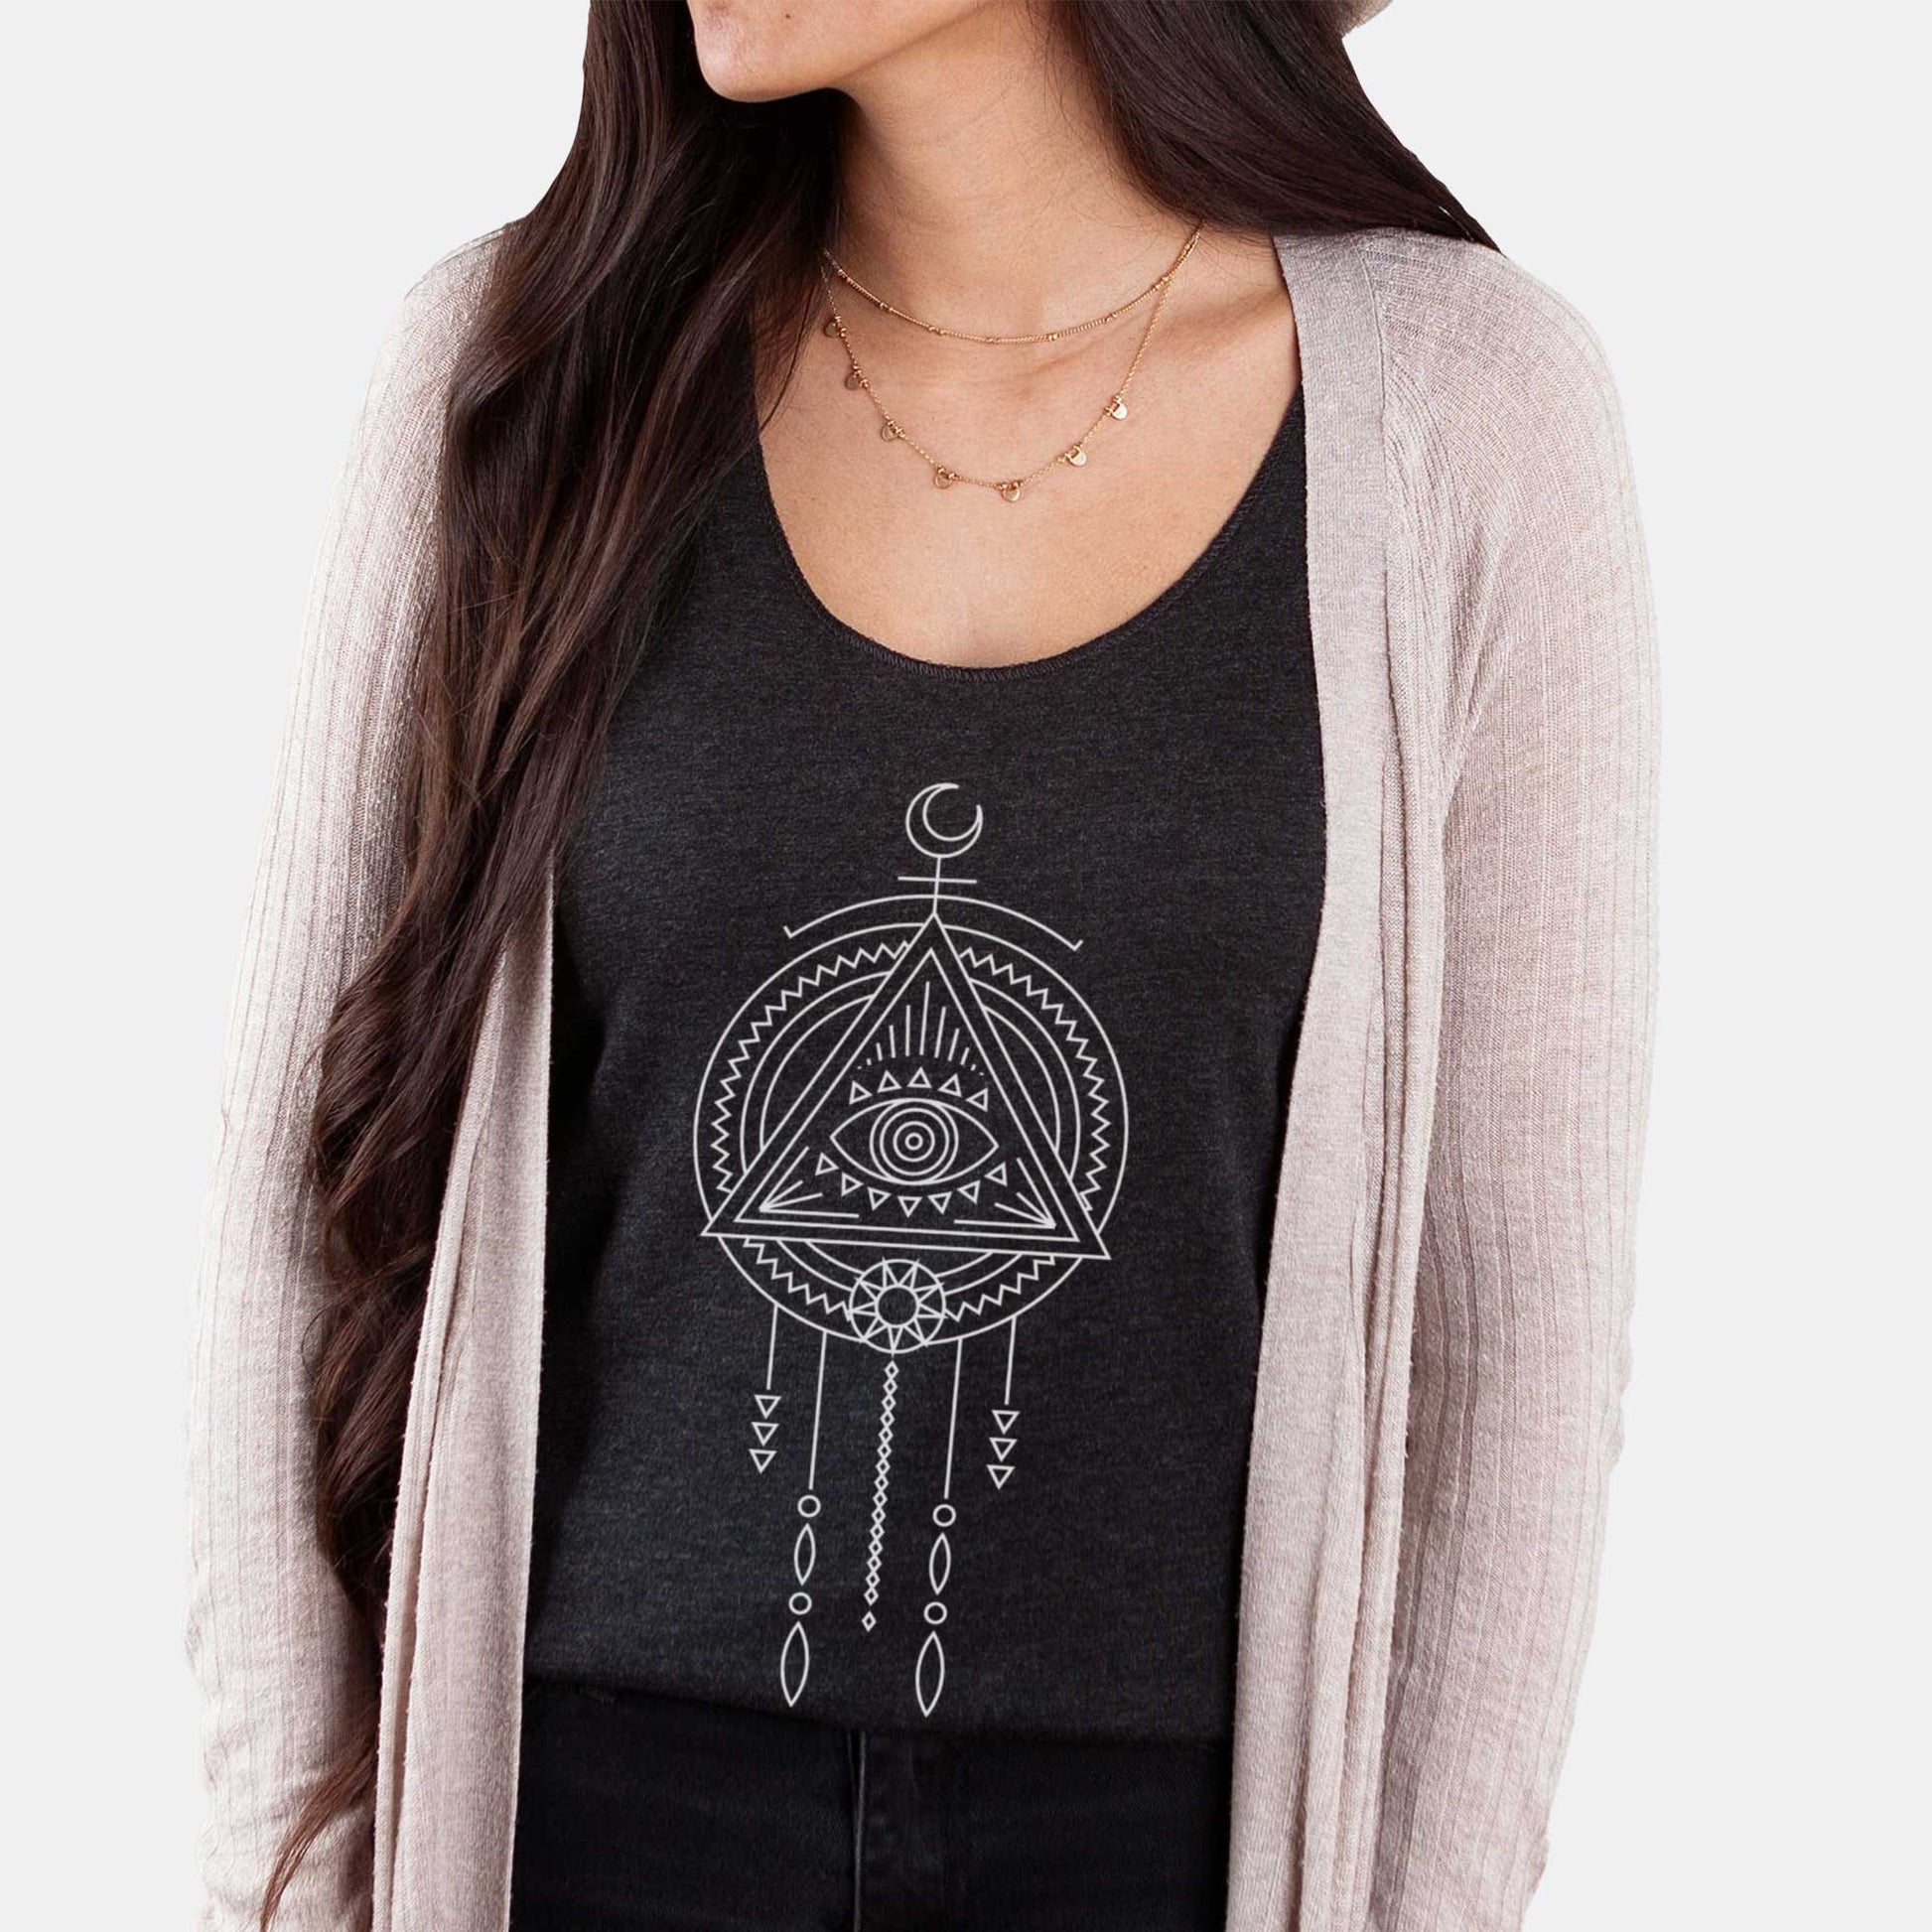 A woman wearing a vintage black Next Level racerback tank featuring an eye of providence symbol in a minimalist dream catcher line art.